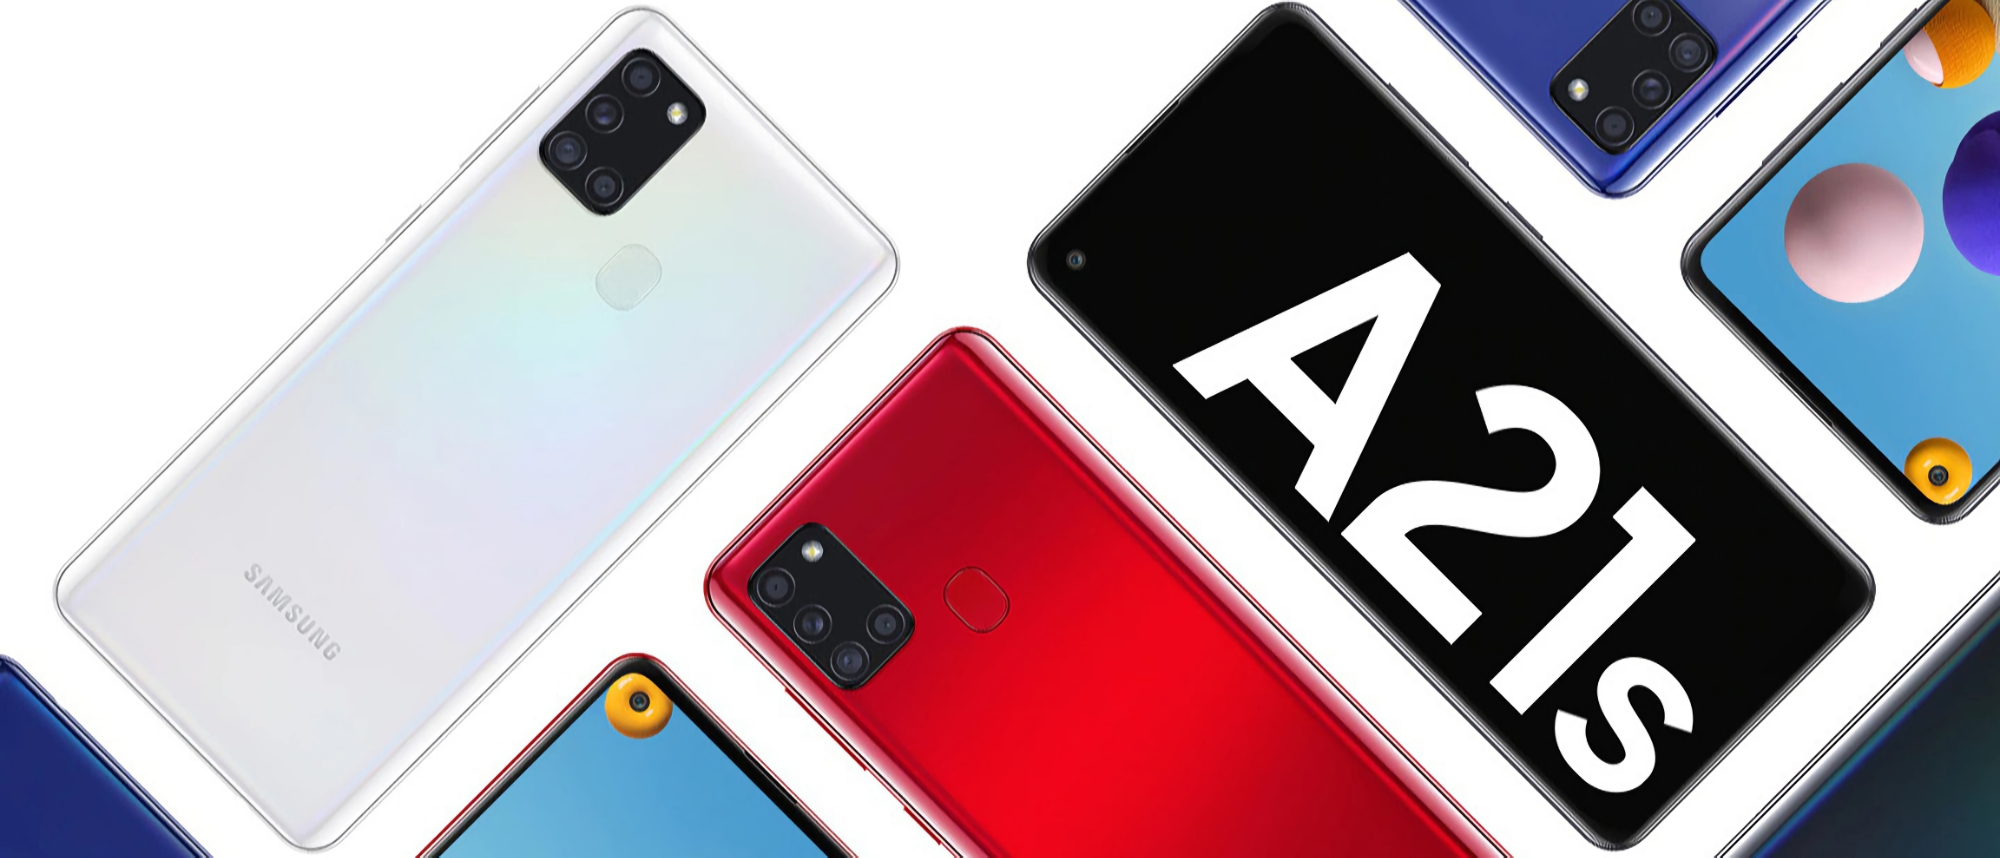 Samsung released Android 12 update with One UI 4.1 for Galaxy A21s and Galaxy A03s